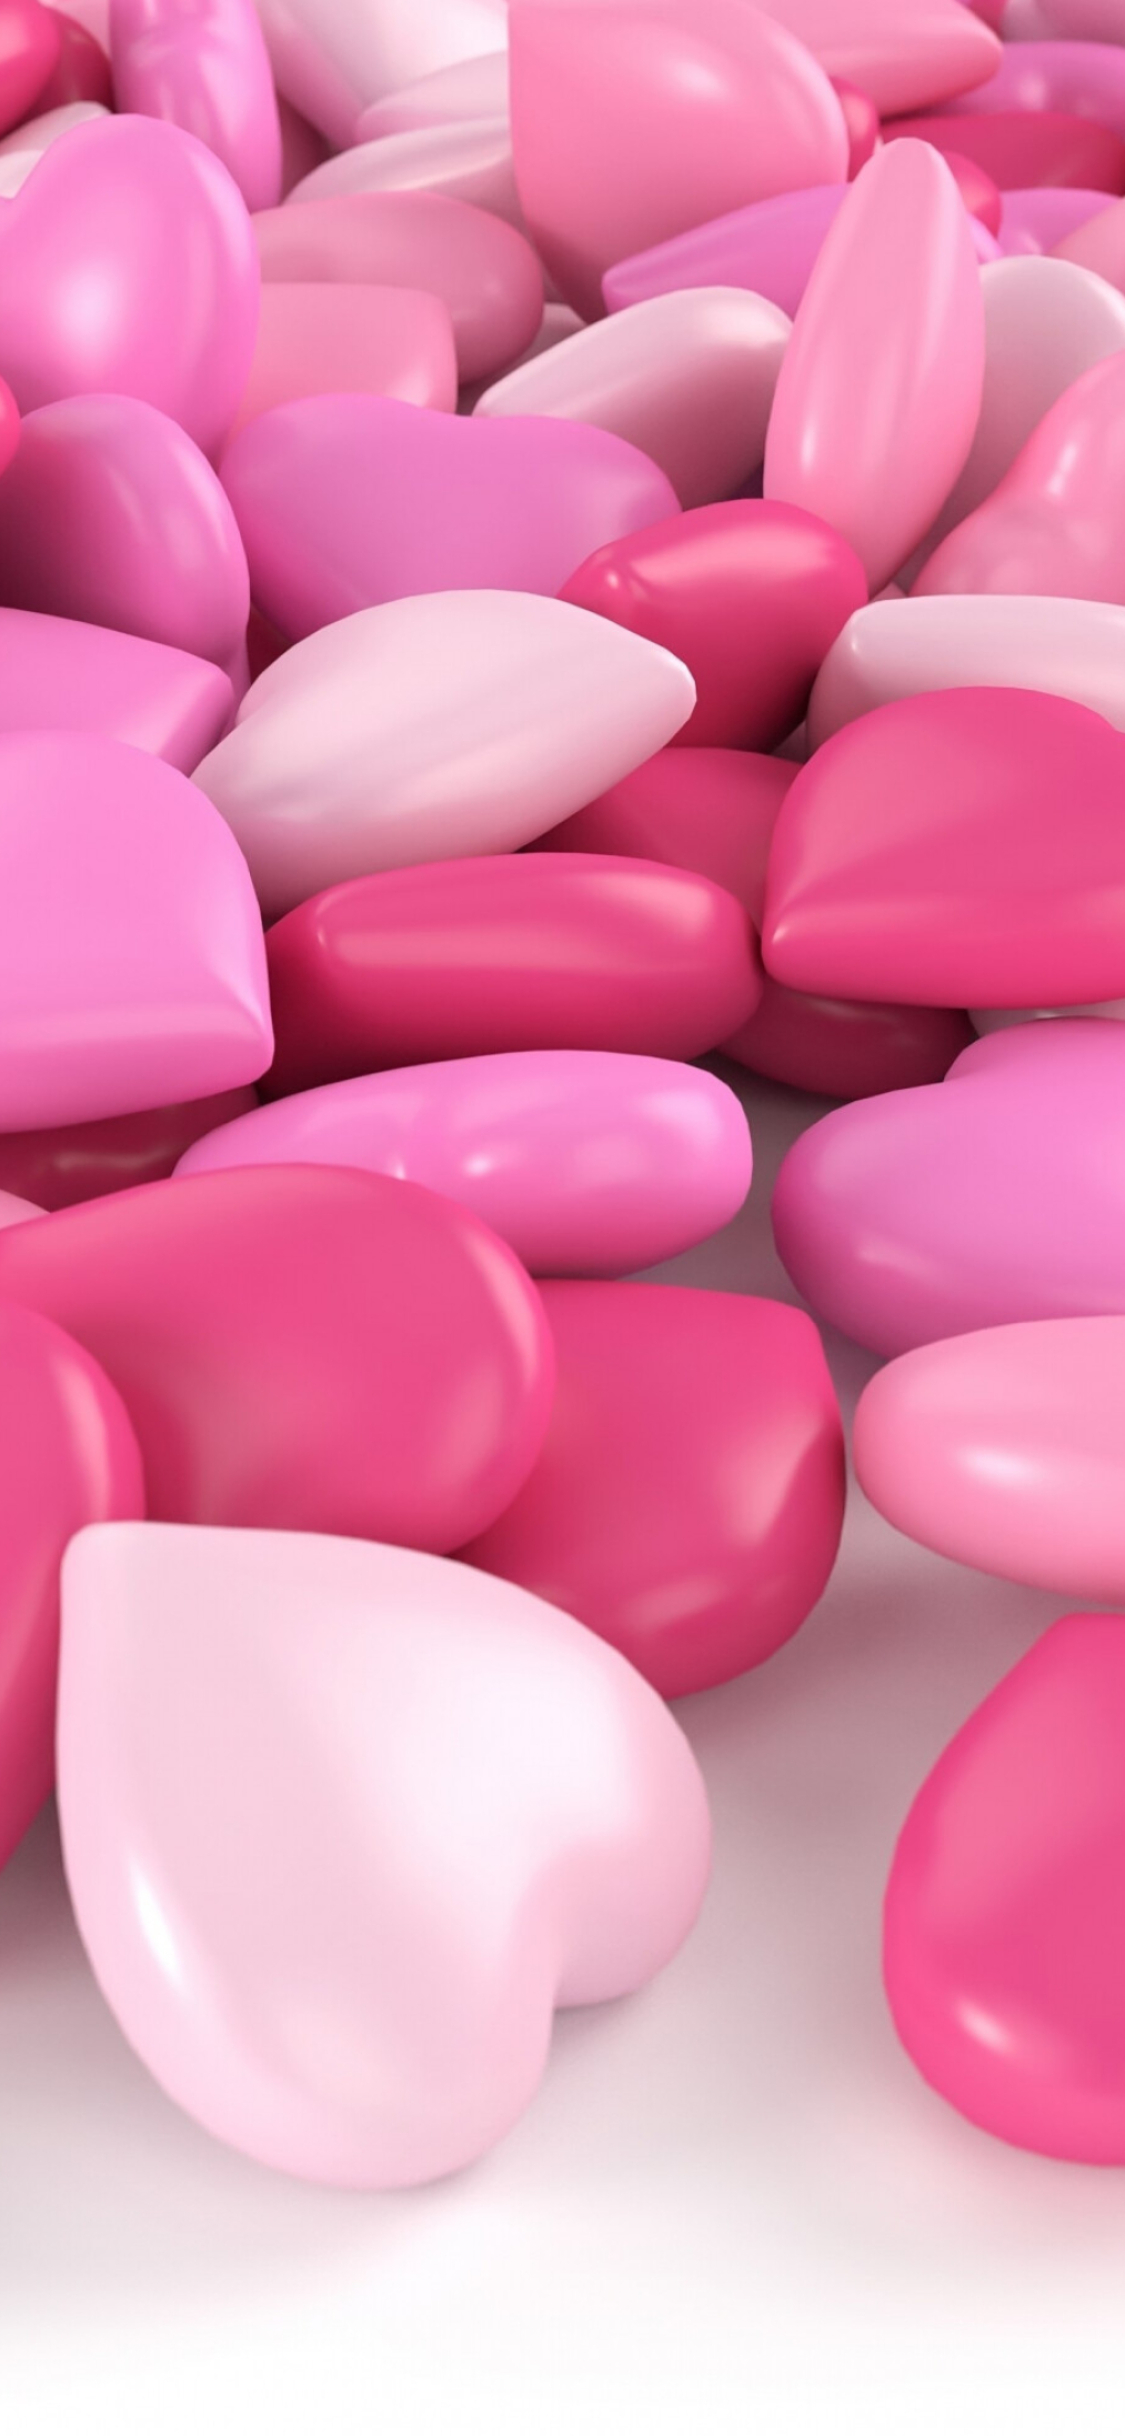 Sweets: Sweethearts, Valentine's Day confectionery. 1130x2440 HD Wallpaper.